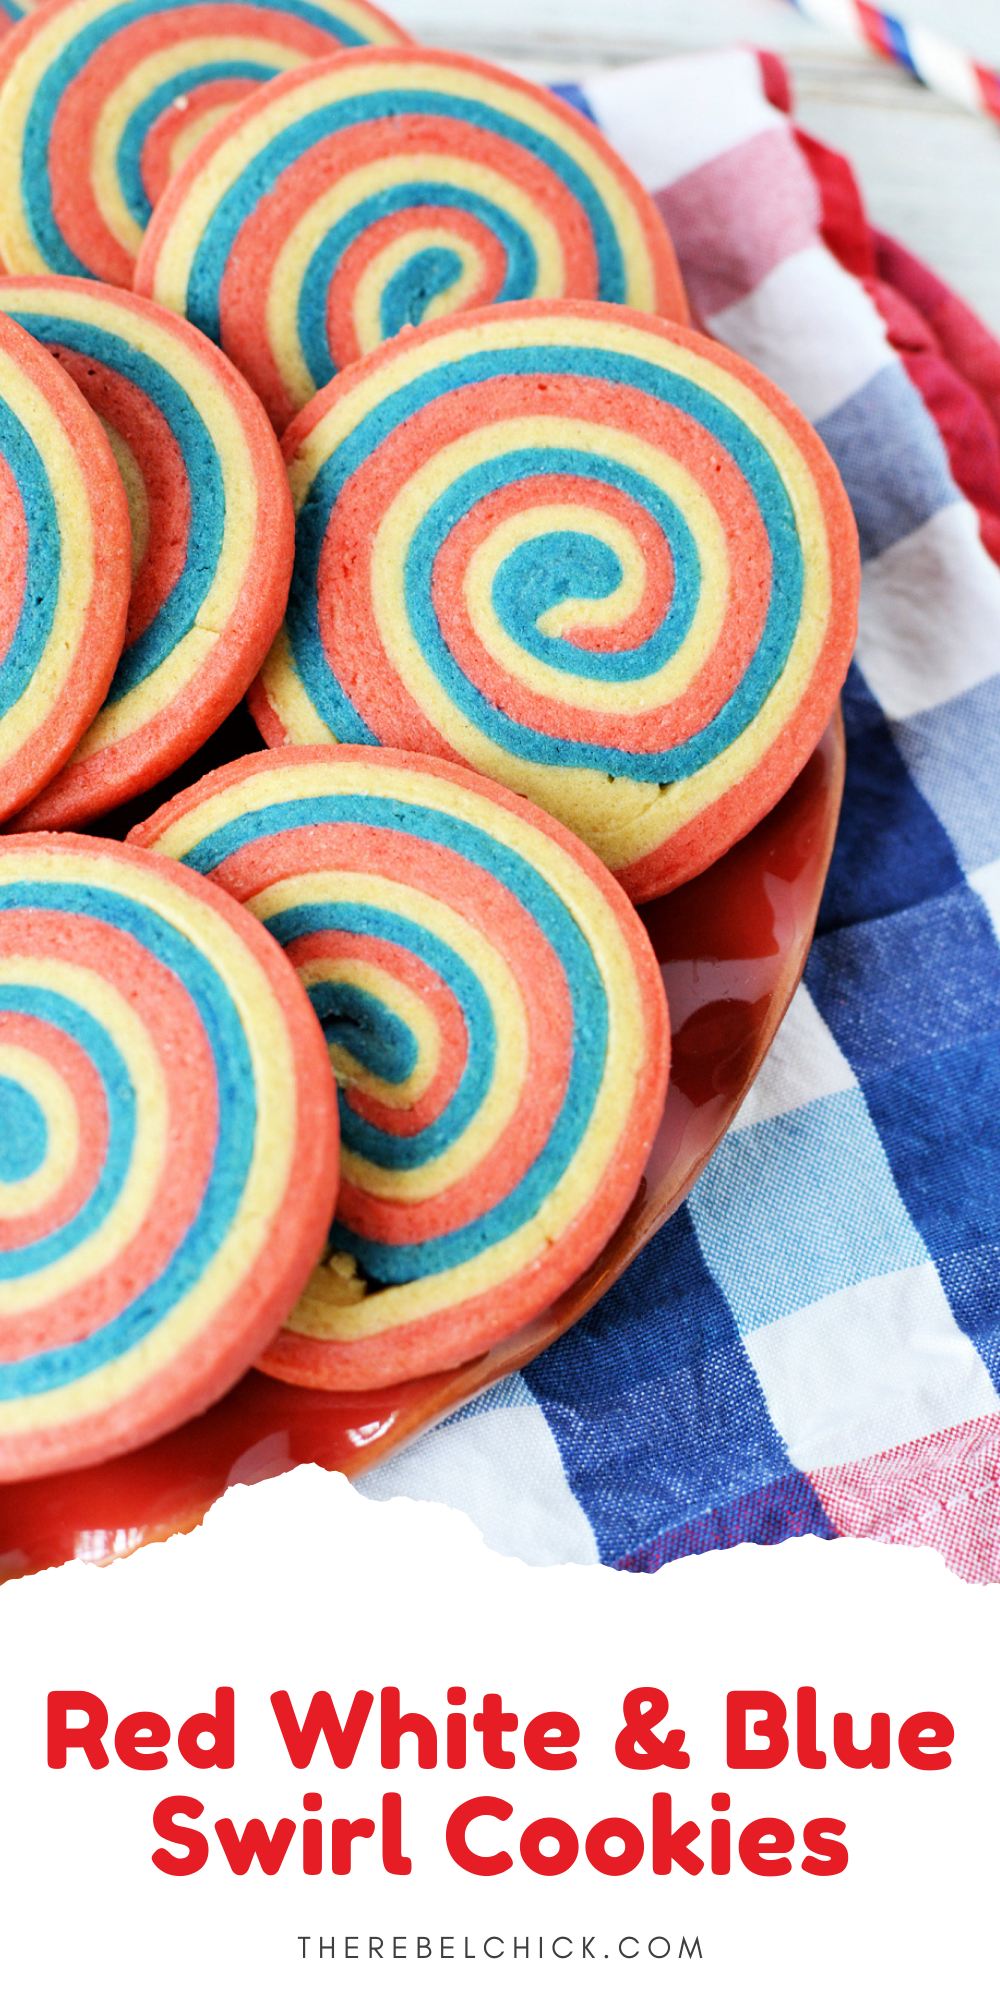 Red White and Blue Swirl Cookies Recipe